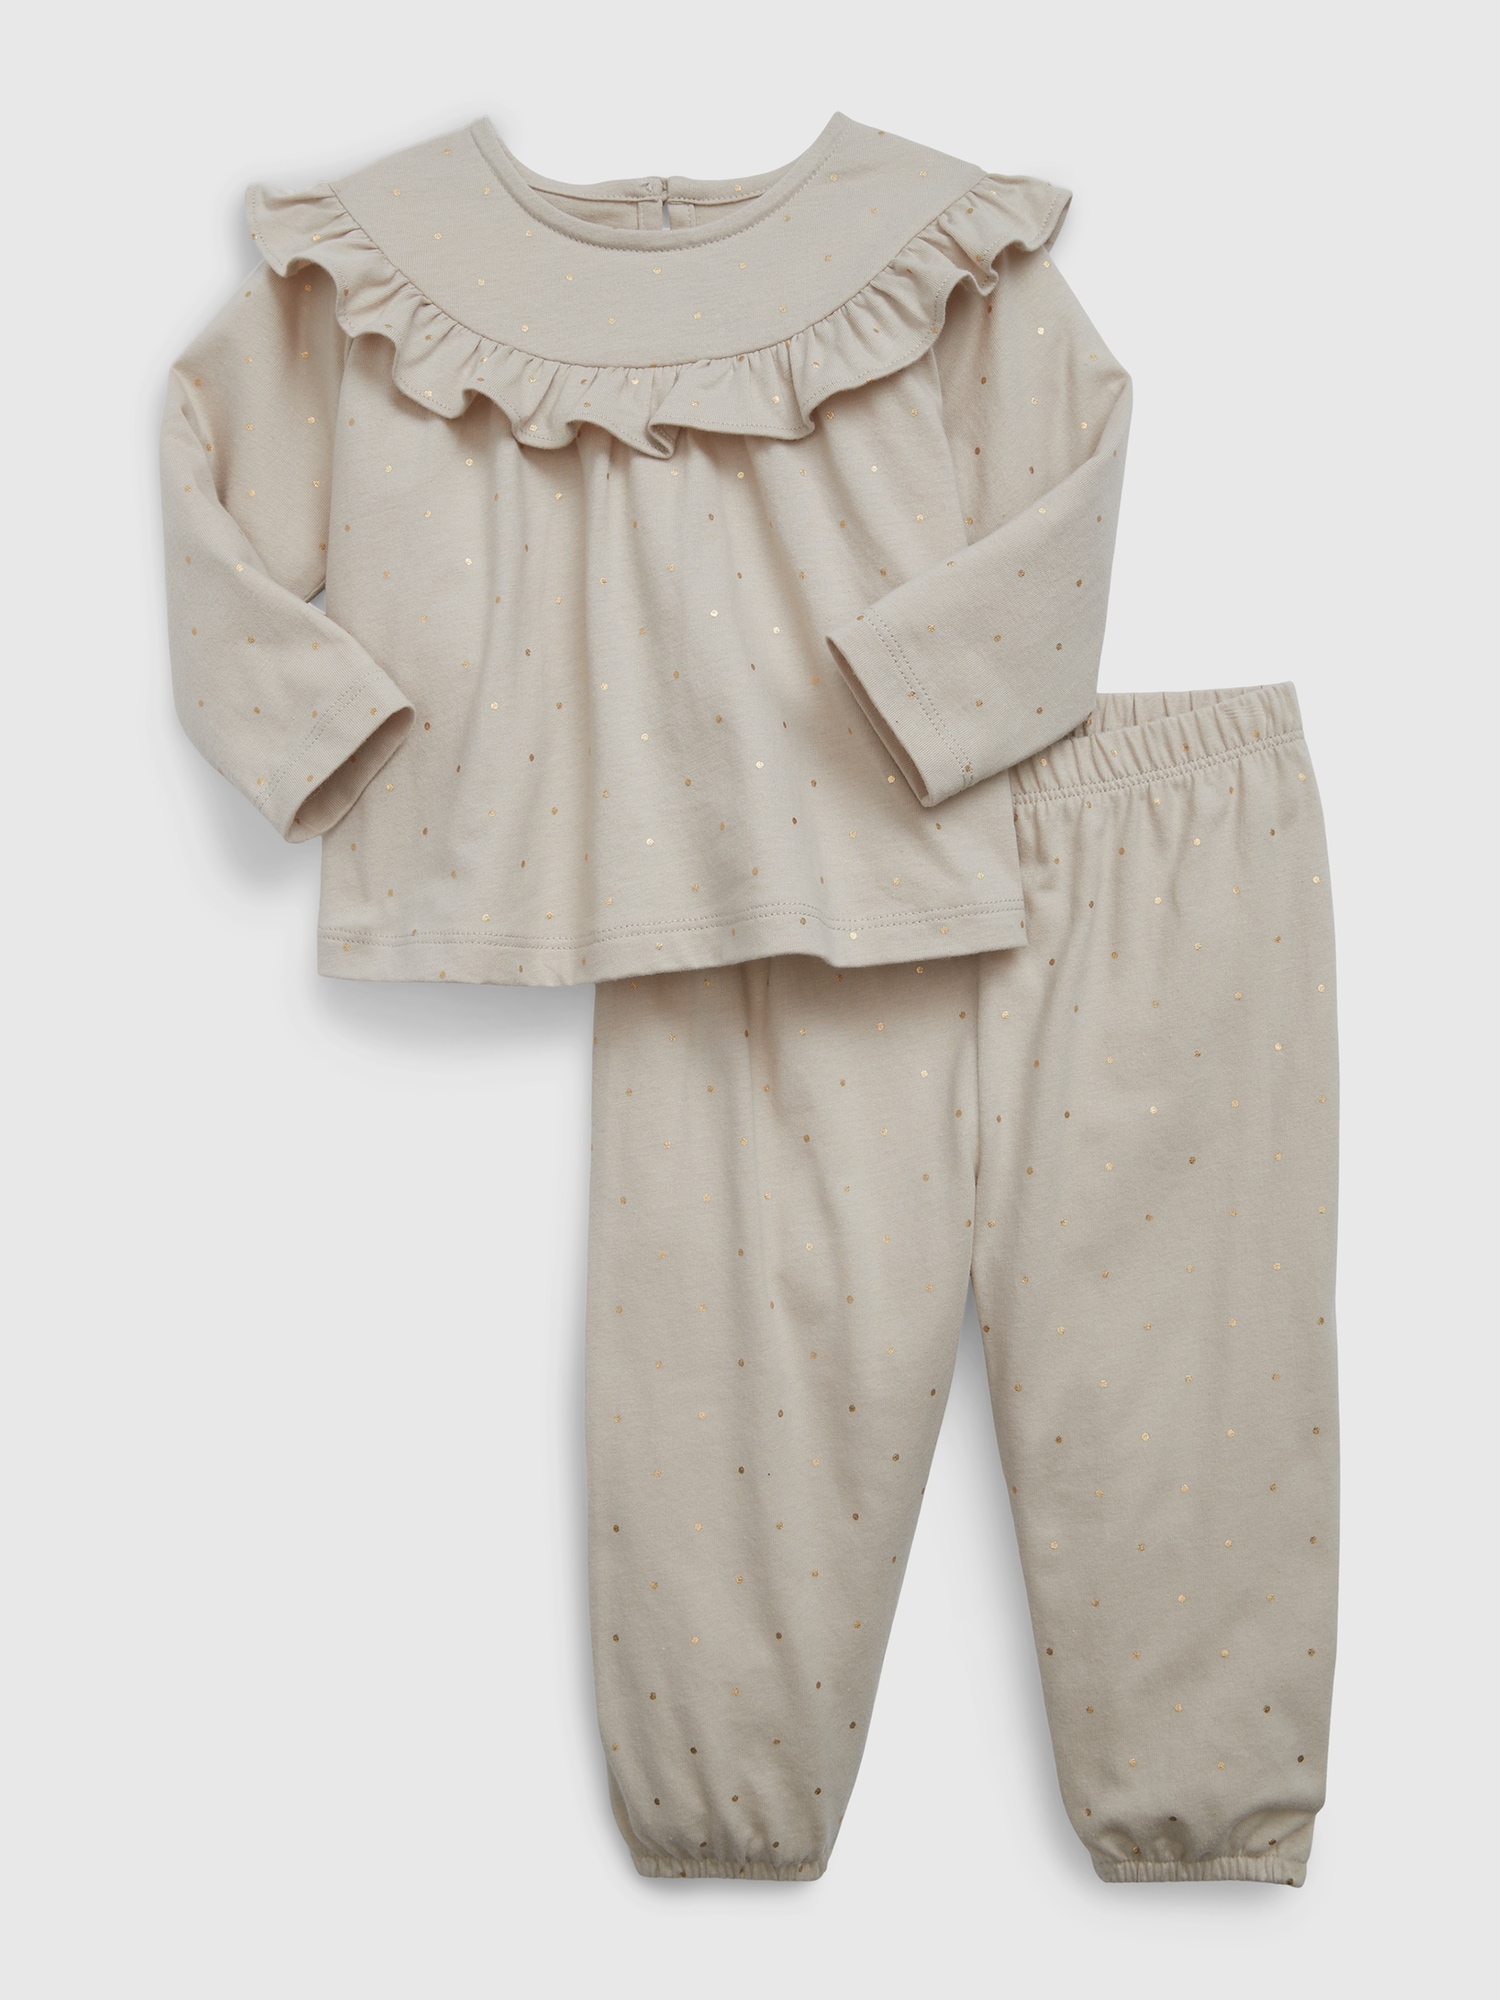 Gap Baby First Favorites Organic Cotton Ruffle Outfit Set